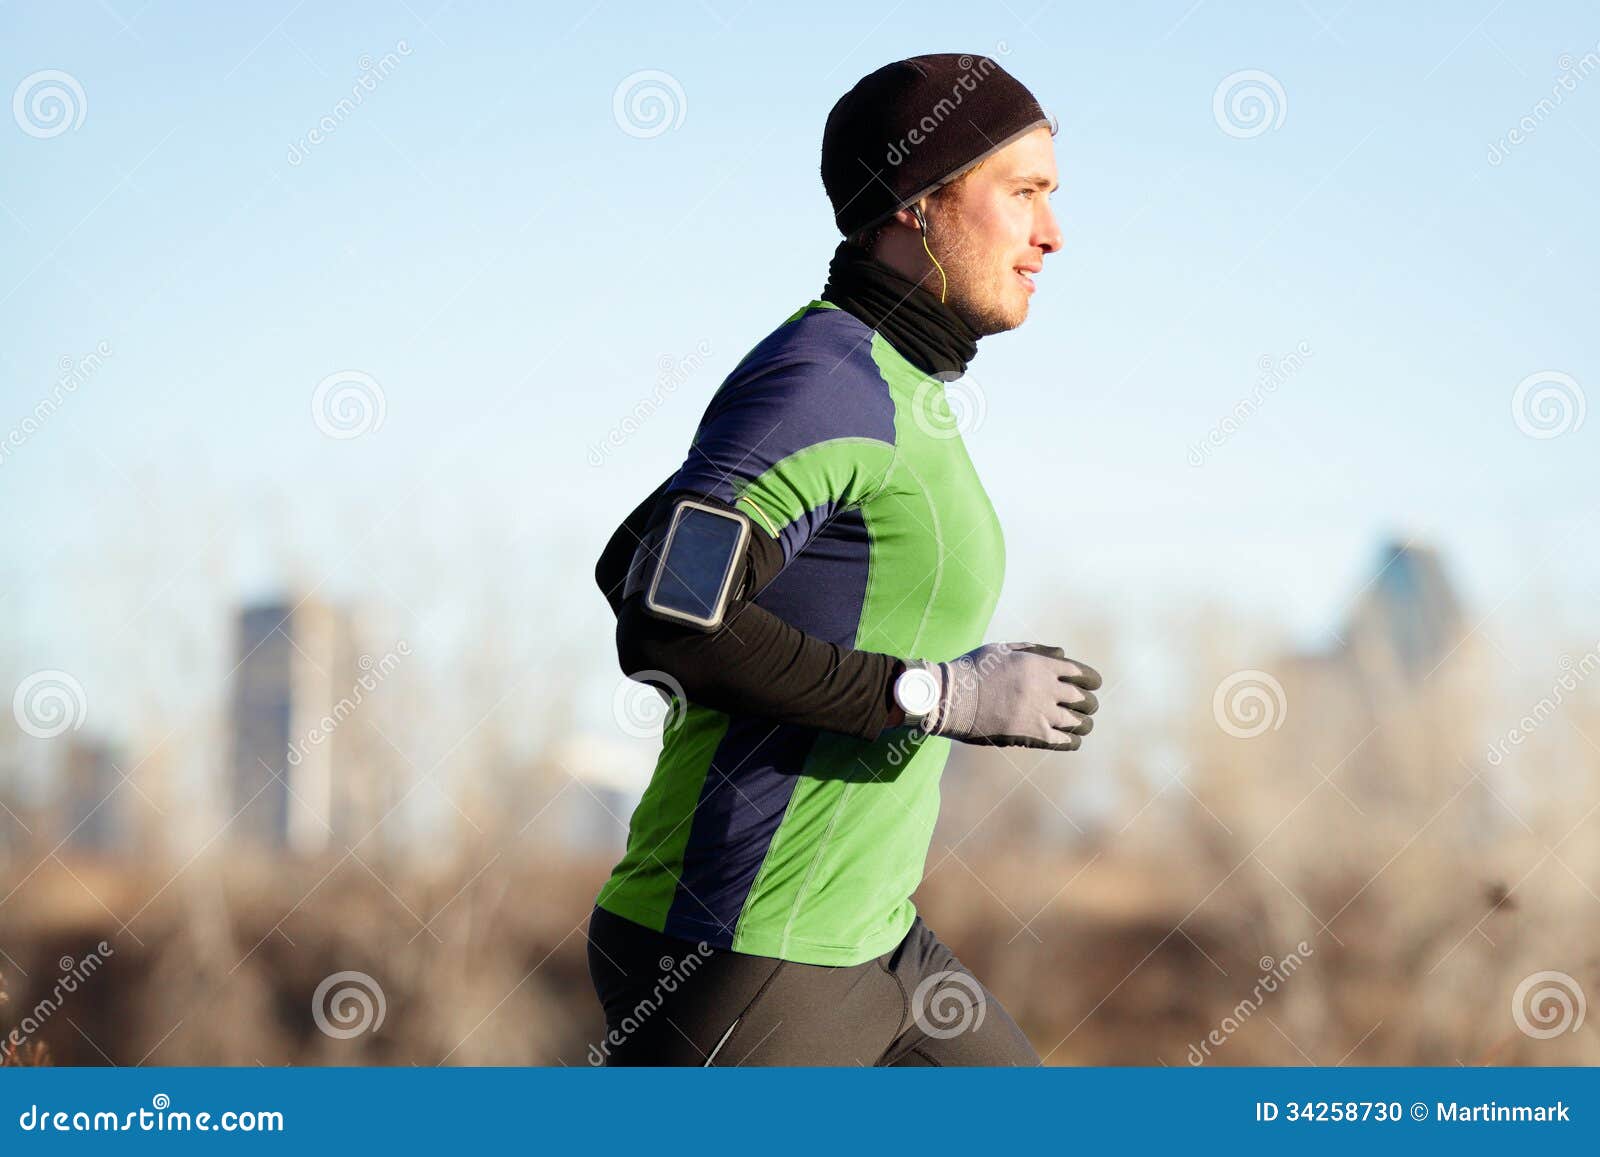 Running Man Jogging In Autumn To Music On Phone Stock Photo